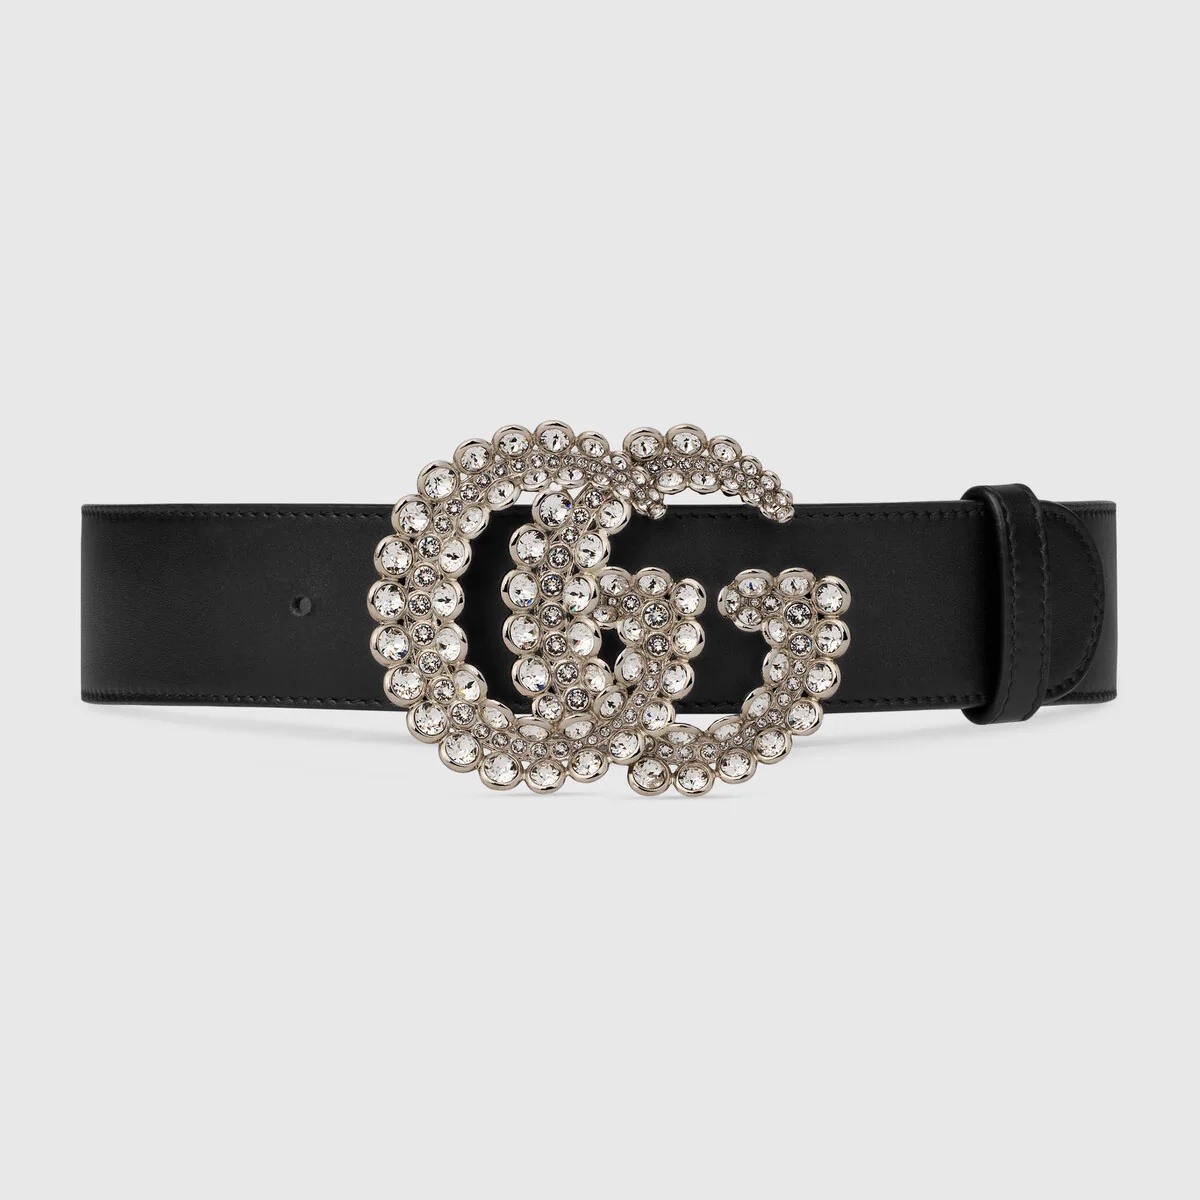 Reversible double G leather belt in black - Gucci